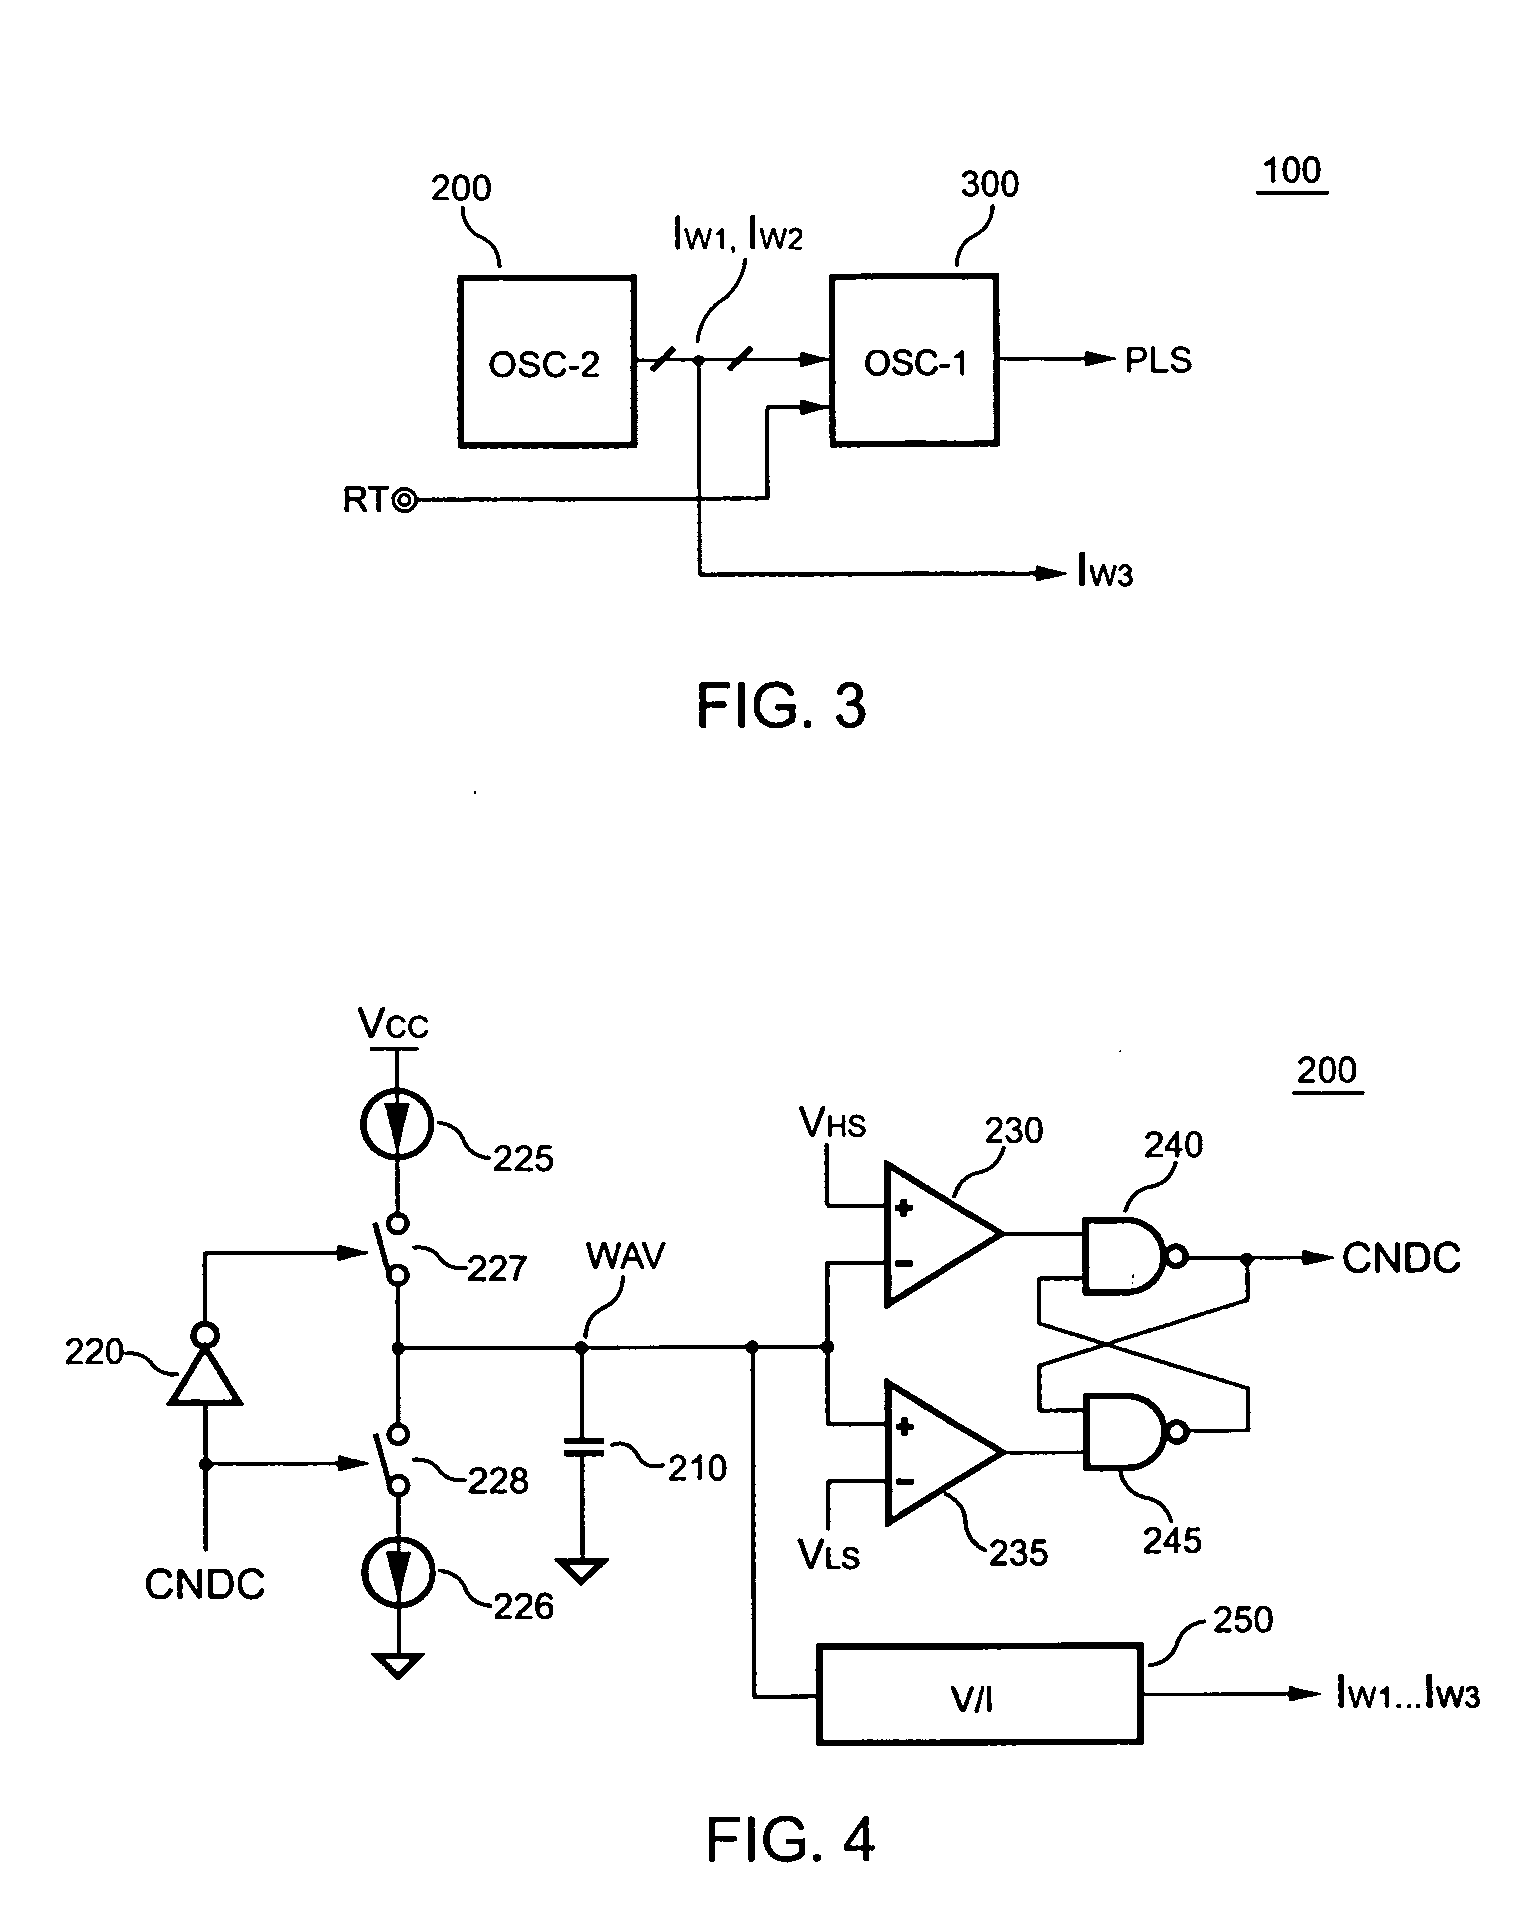 Frequency hopping control circuit for reducing EMI of power supplies